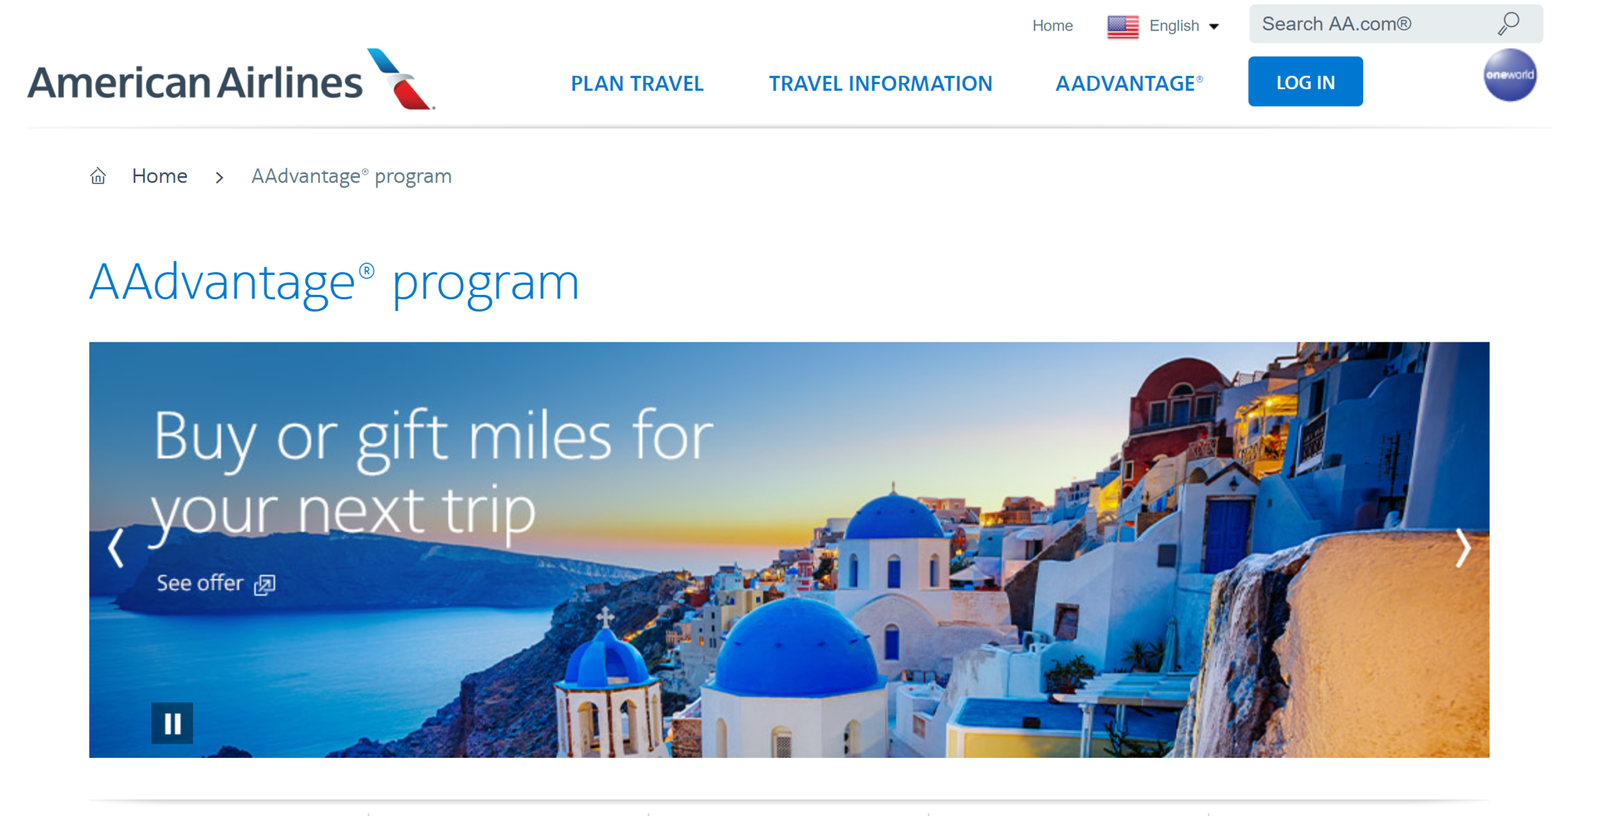 Register Your American Airlines Account Online